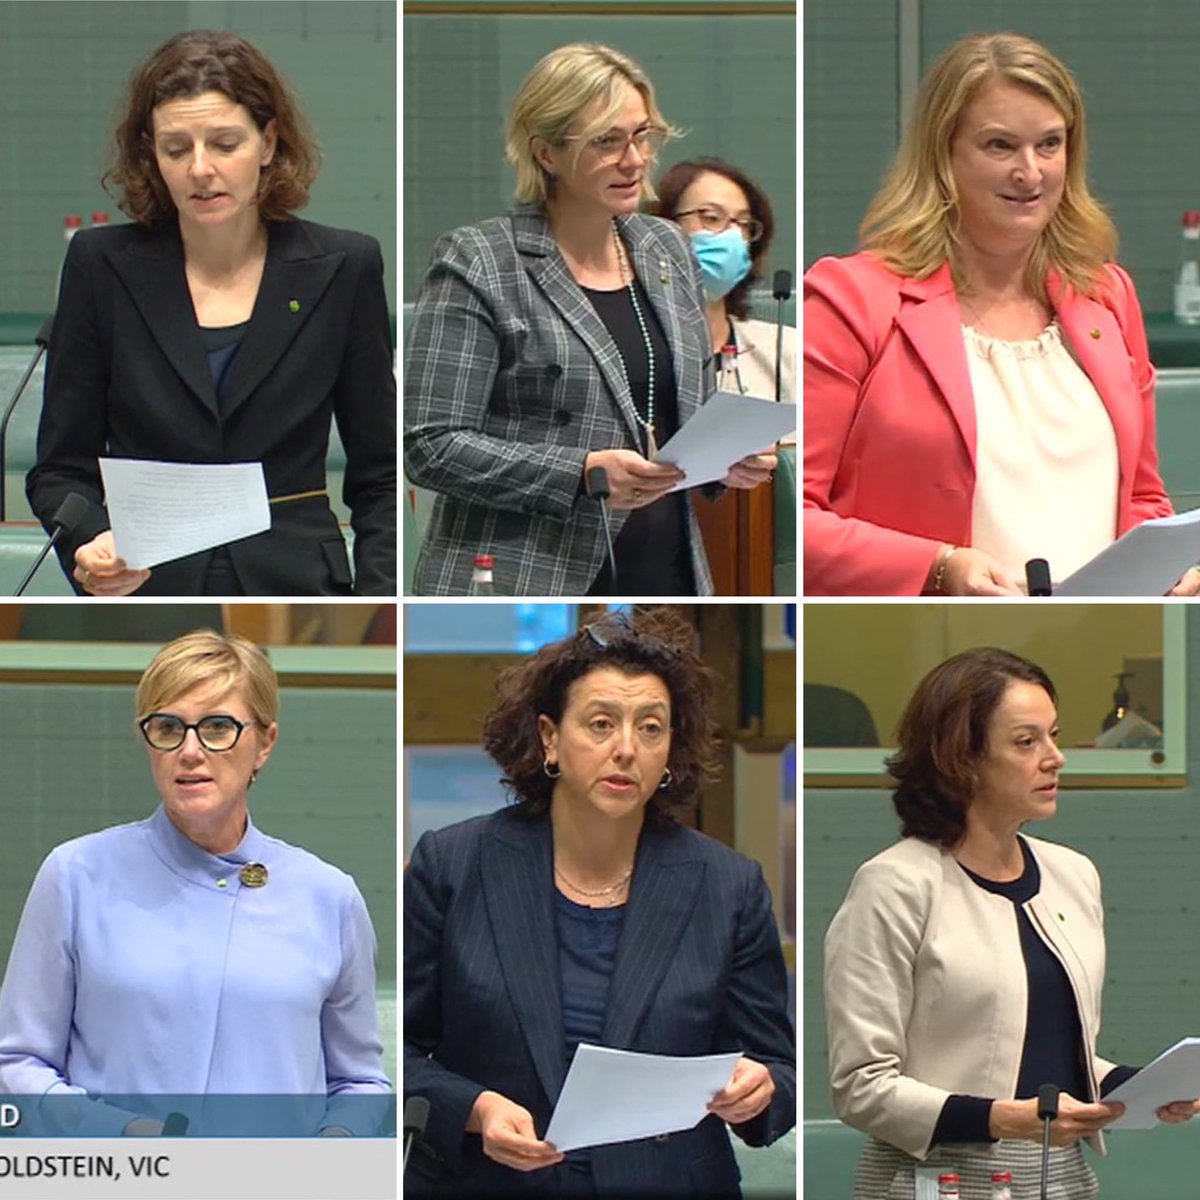 That the crossbench used their “matter of public importance” to call for end to arbitrary indefinite detention is incredible. Thank you for acting on the priorities of refugees from our @ASRC1 delegation @zalisteggall @Mon4Kooyong @zdaniel @spenderallegra @SophieScamps @KyleaTink